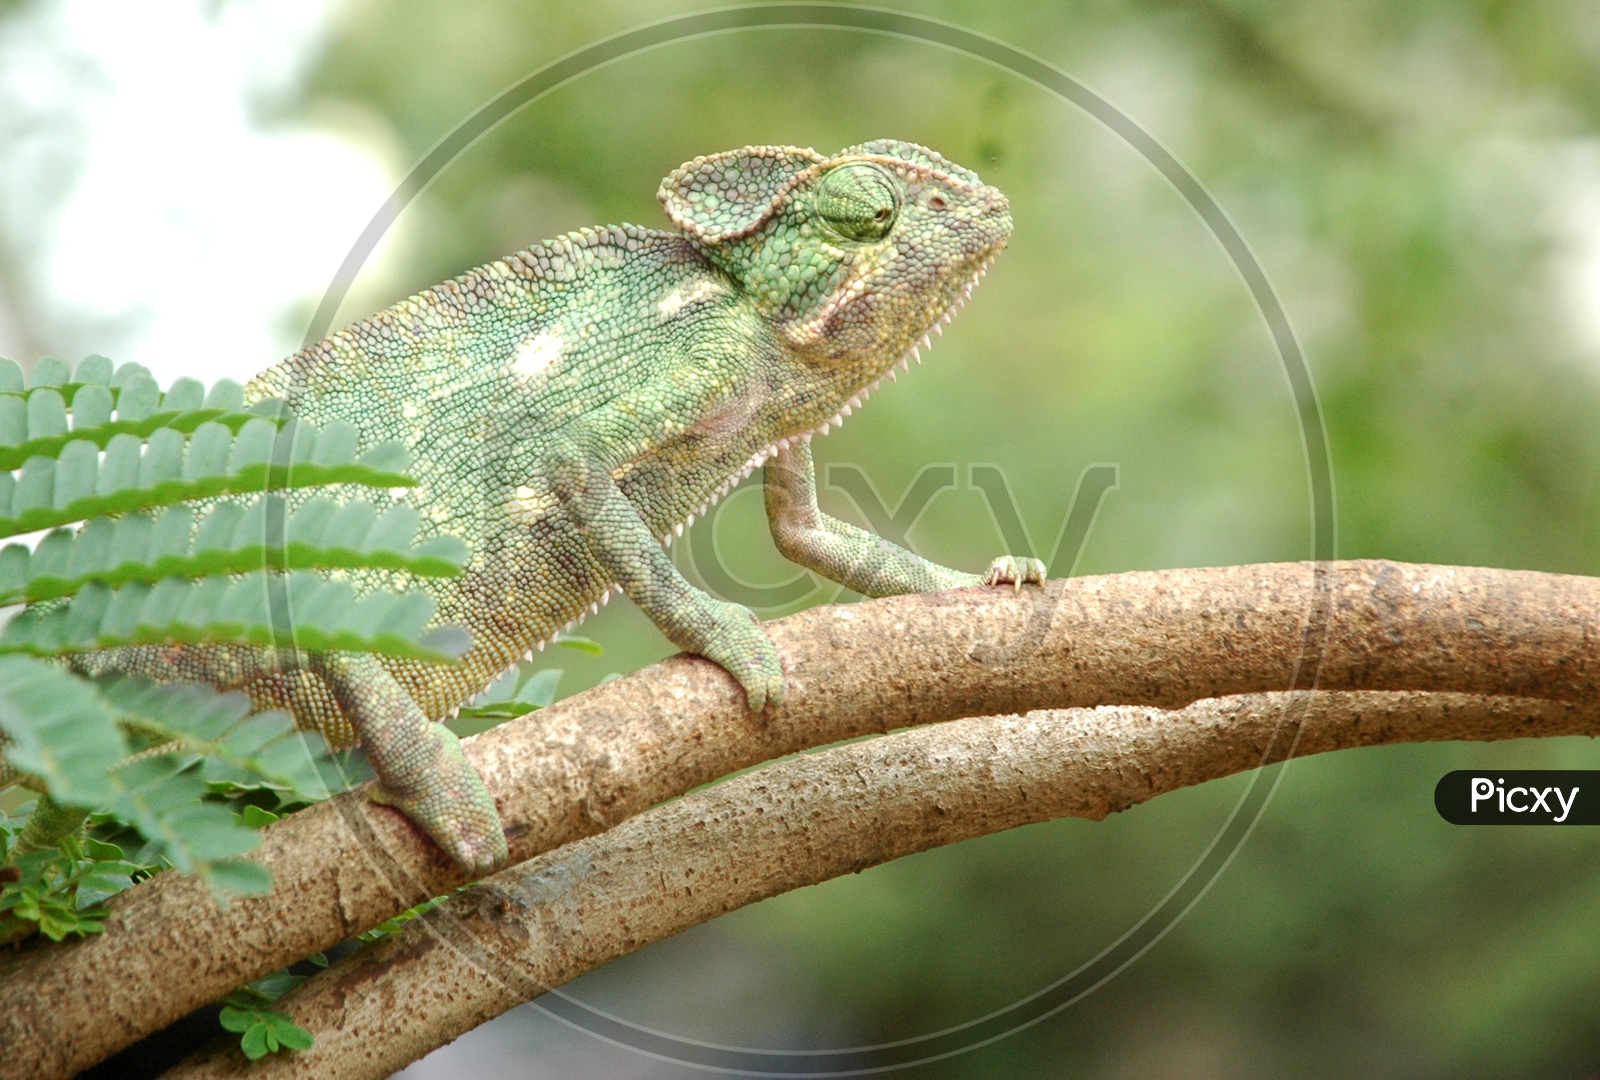 A Chameleon on the tree